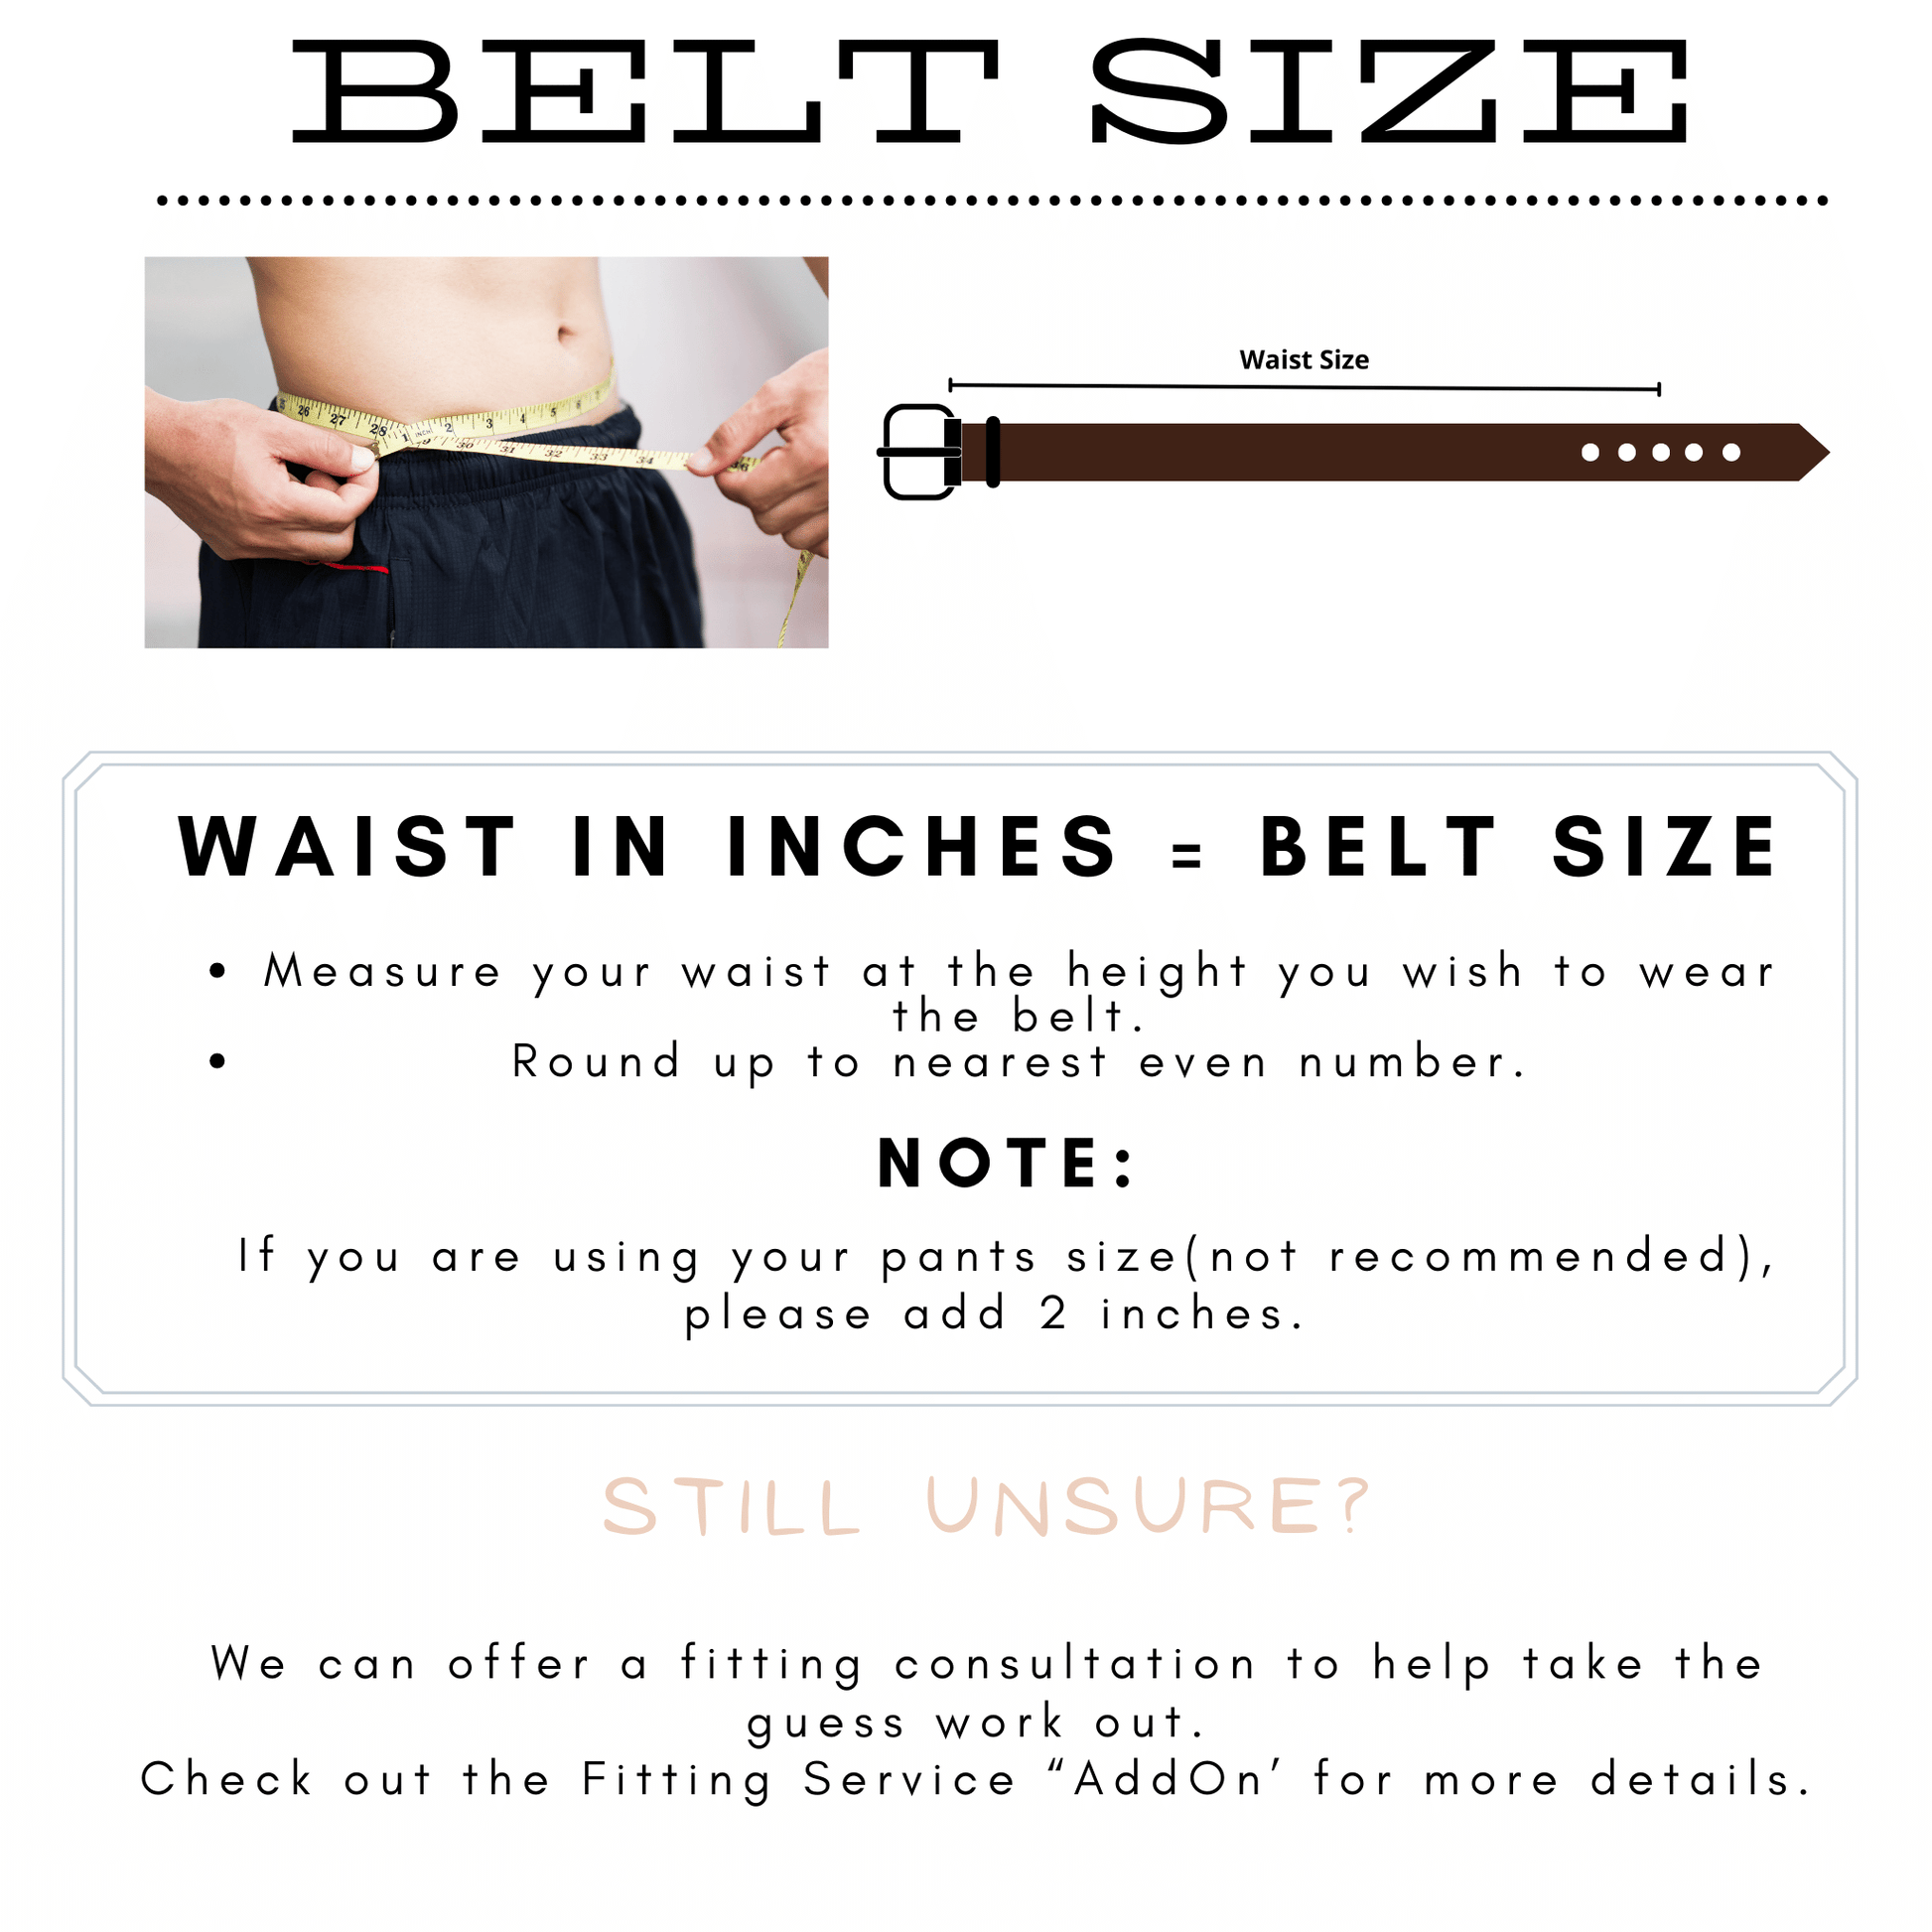 Belt Sizing Advice - Measure or Add 2 inches to your pants size.